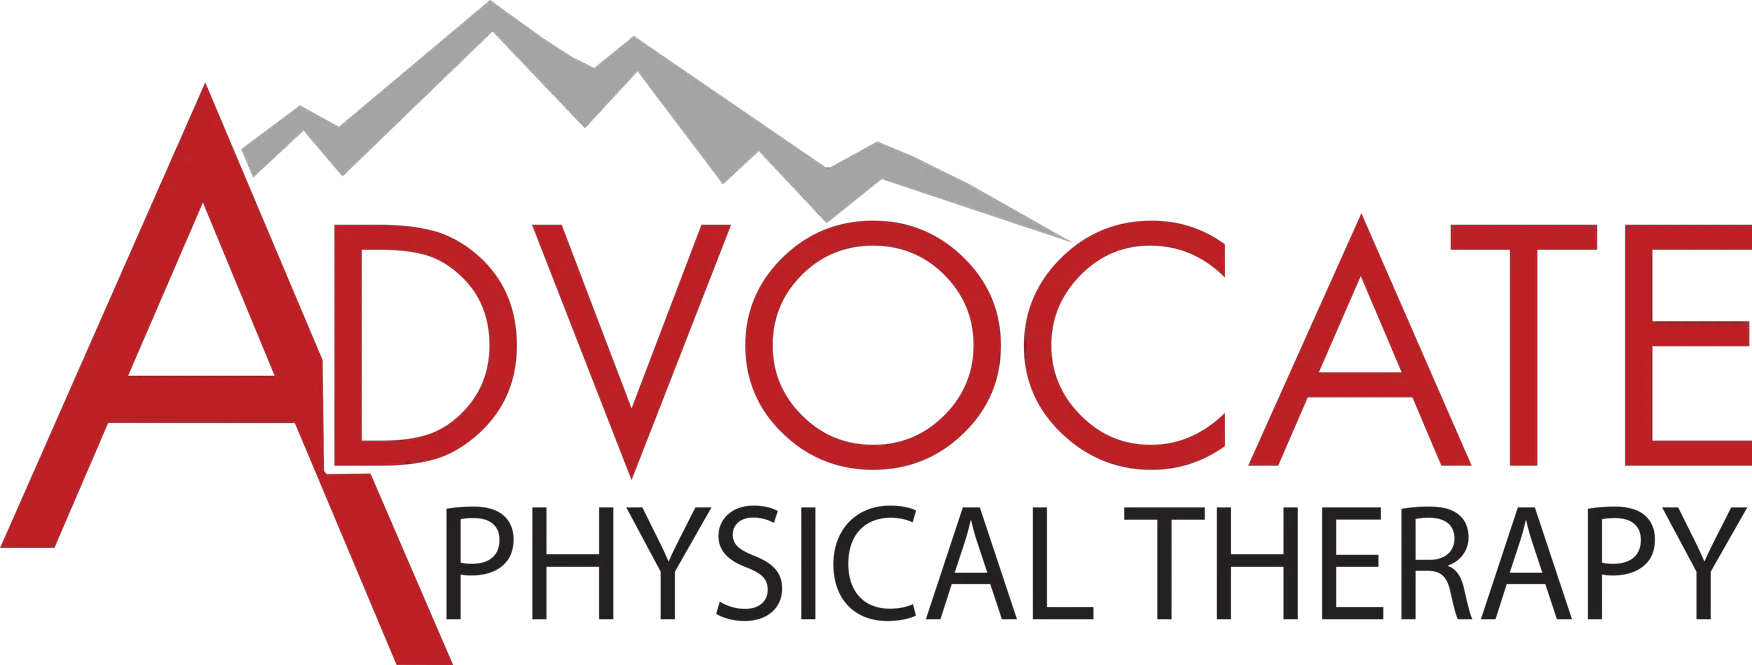 Advocate Physical Therapy Logo